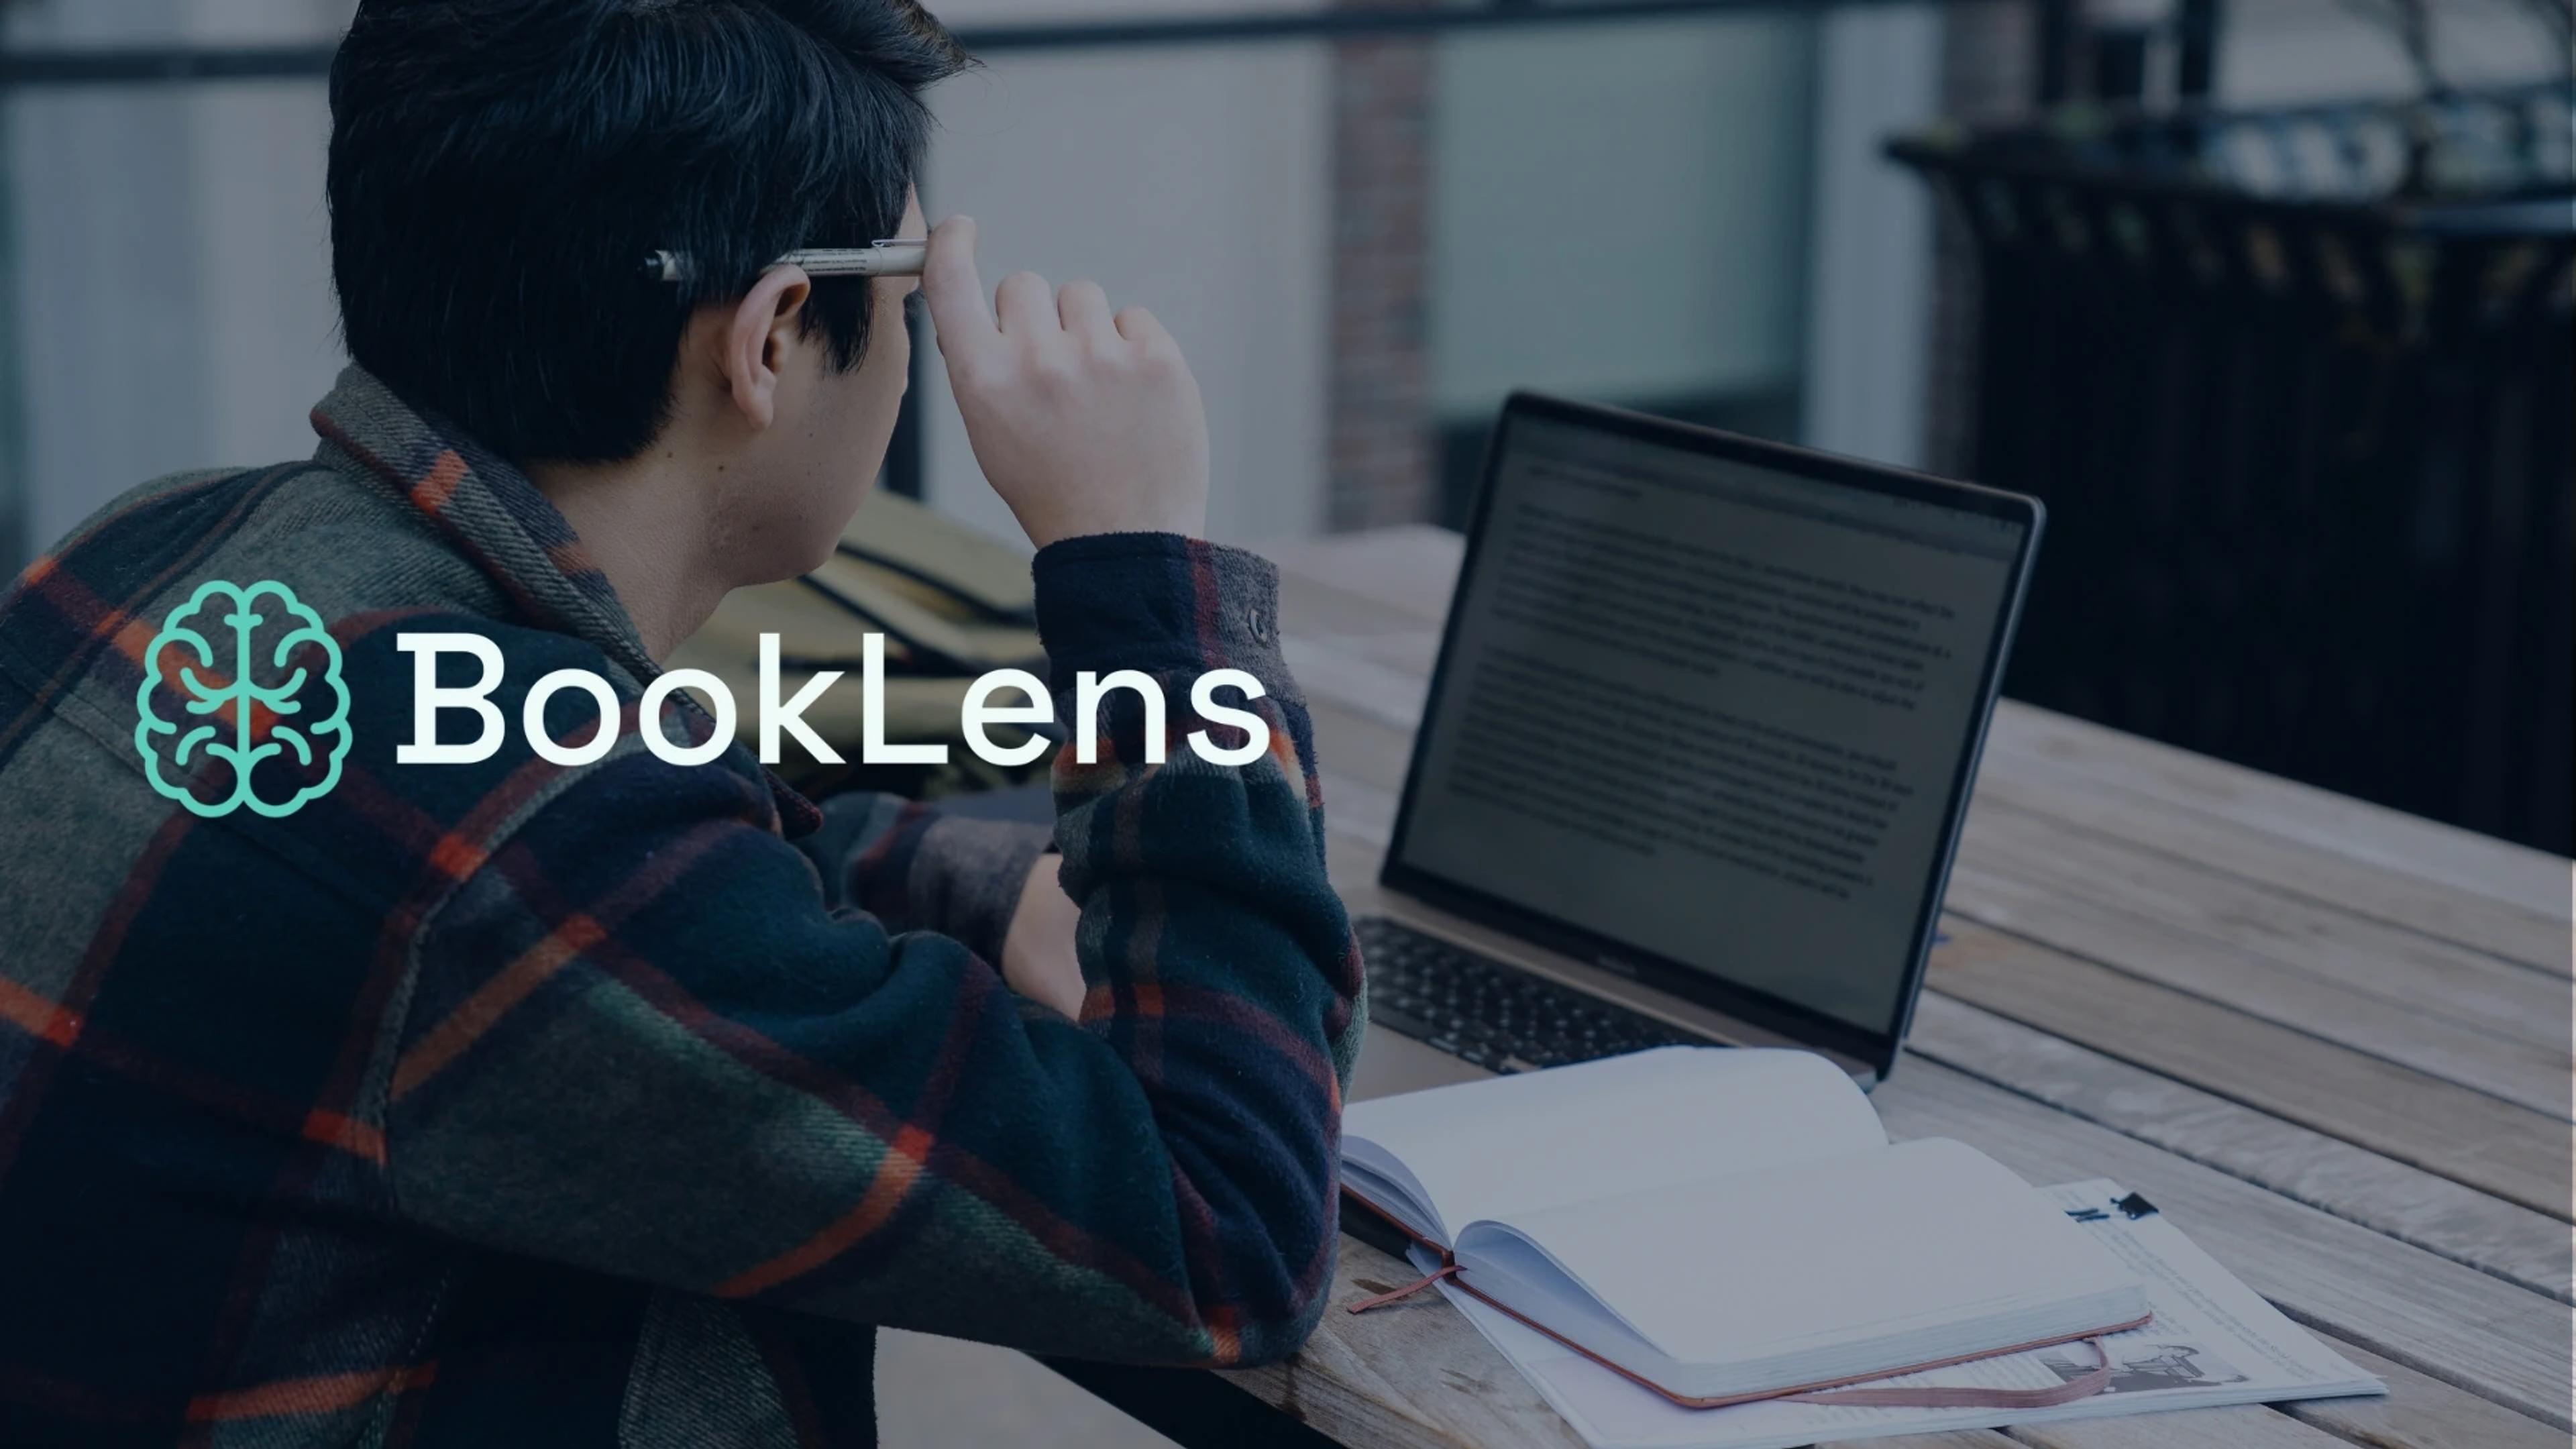 A student reading a book on their laptop. BookLens logo